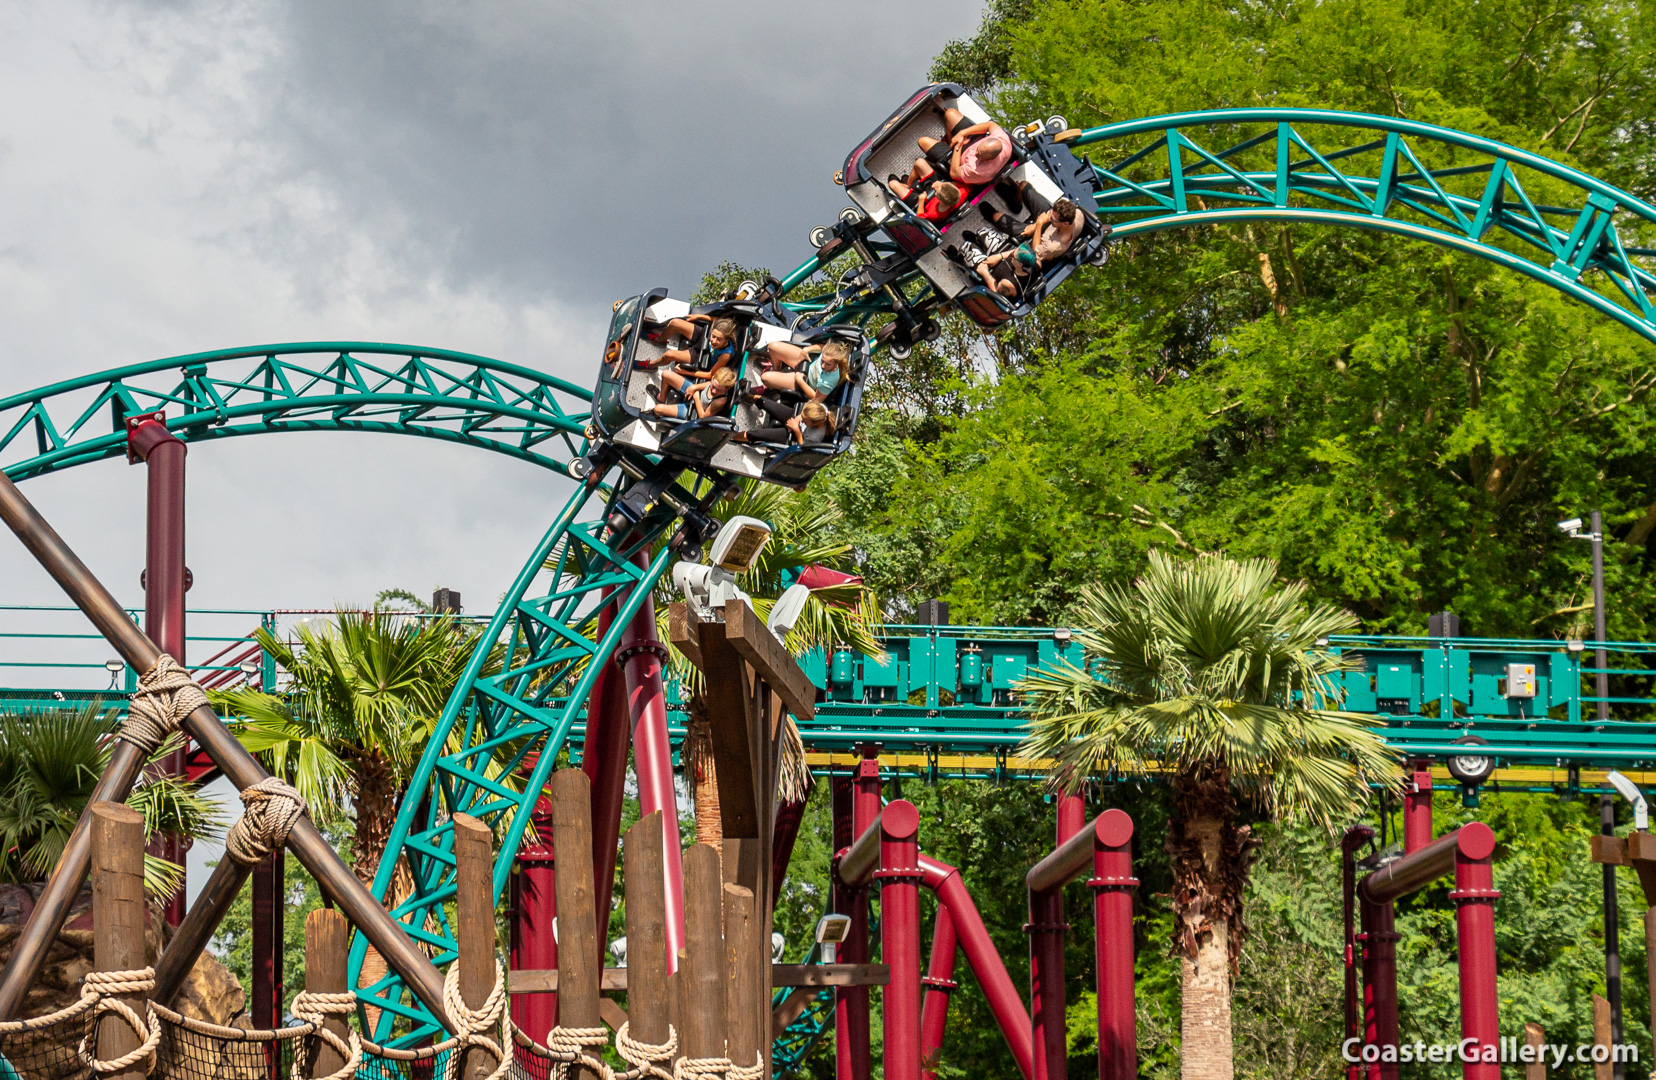 Over-banked turn on the Cobra's Curse roller coaster at Busch Gardens